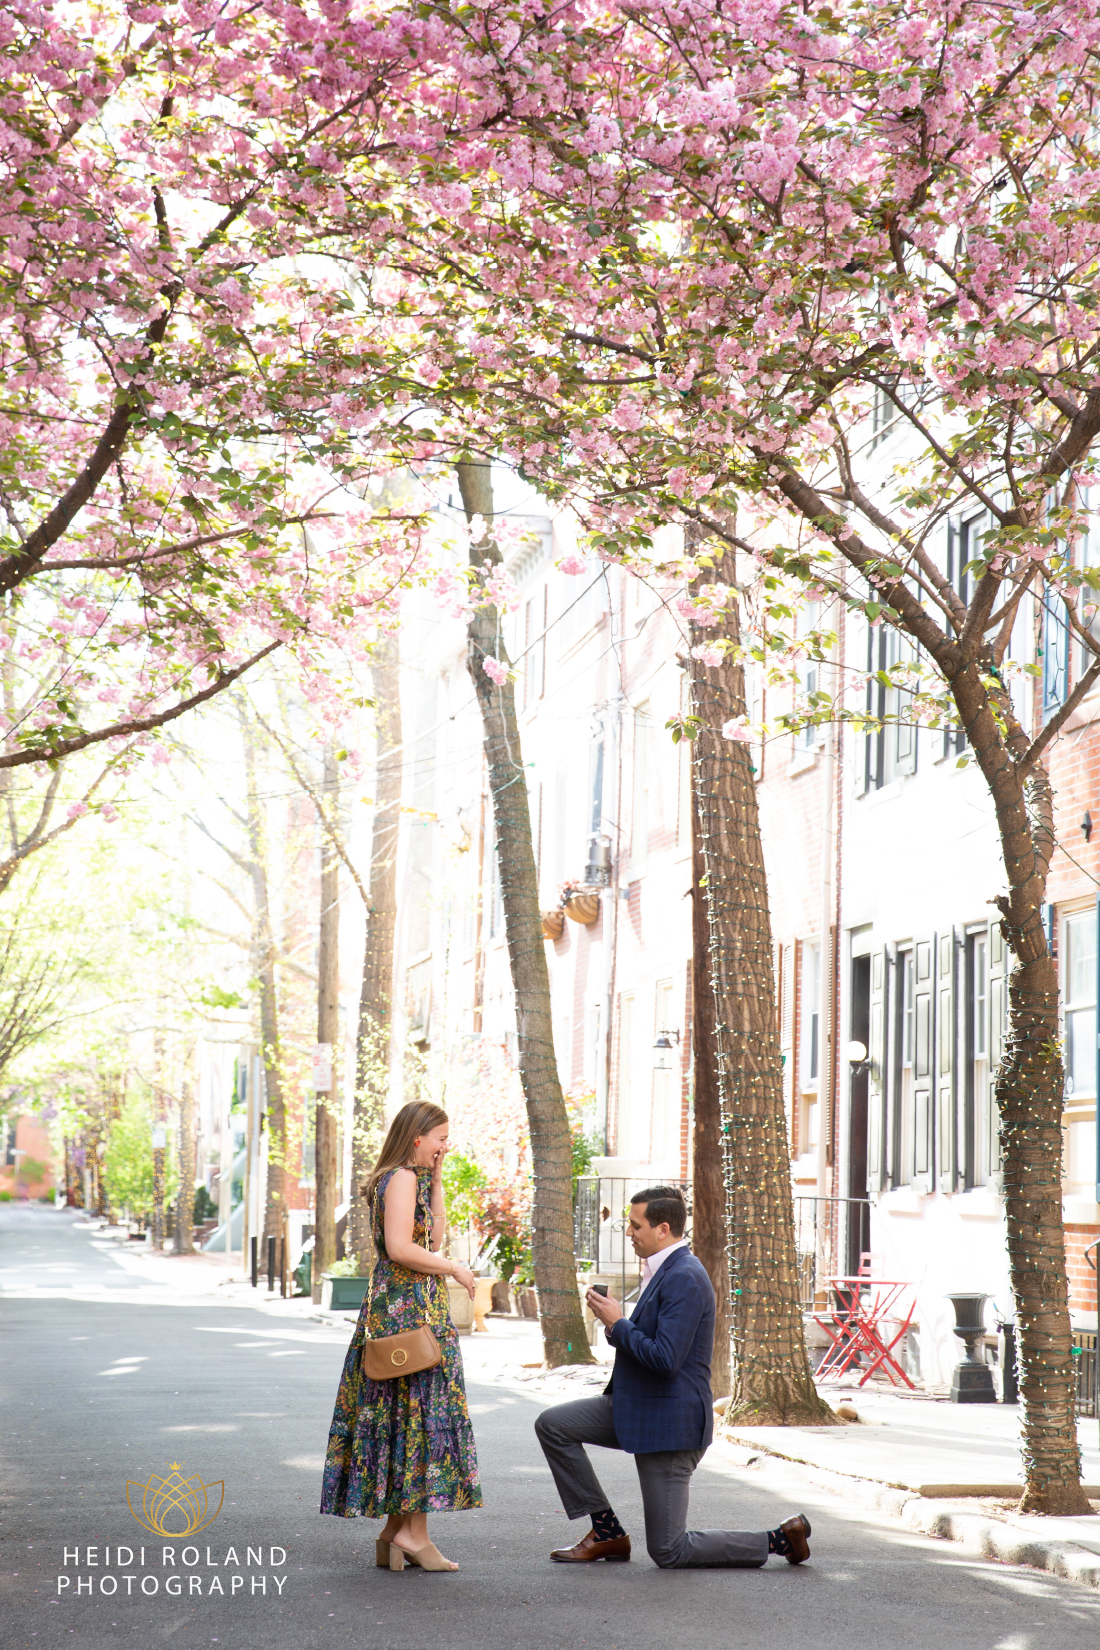 Man on one knee proposing to woman surrounded by cherry blossoms in Philly